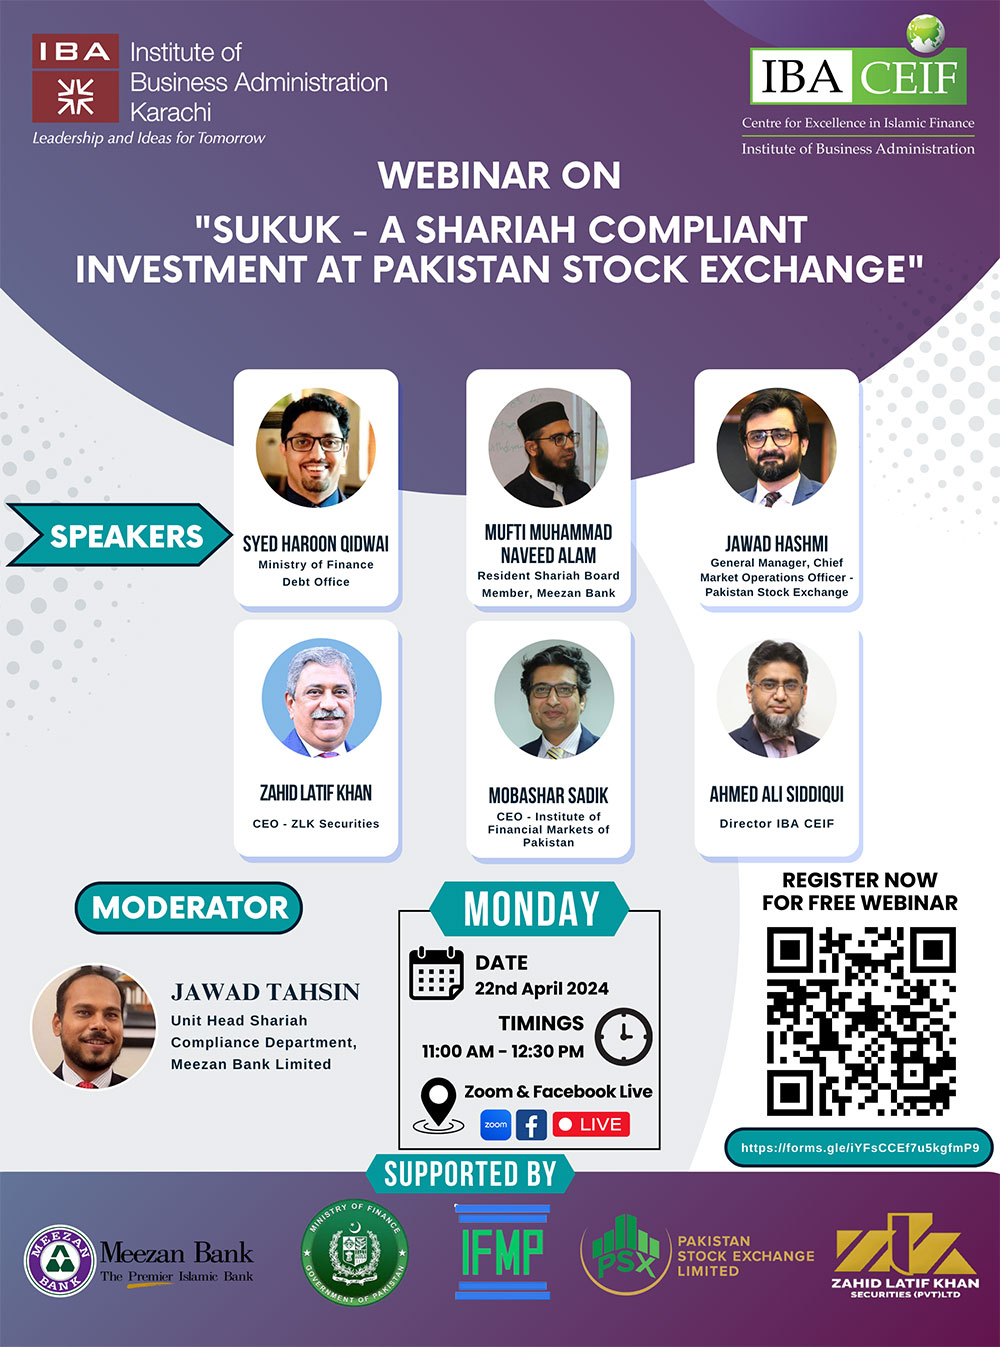 Sukuk - A Shariah Compliant Investment at Pakistan Stock Exchange